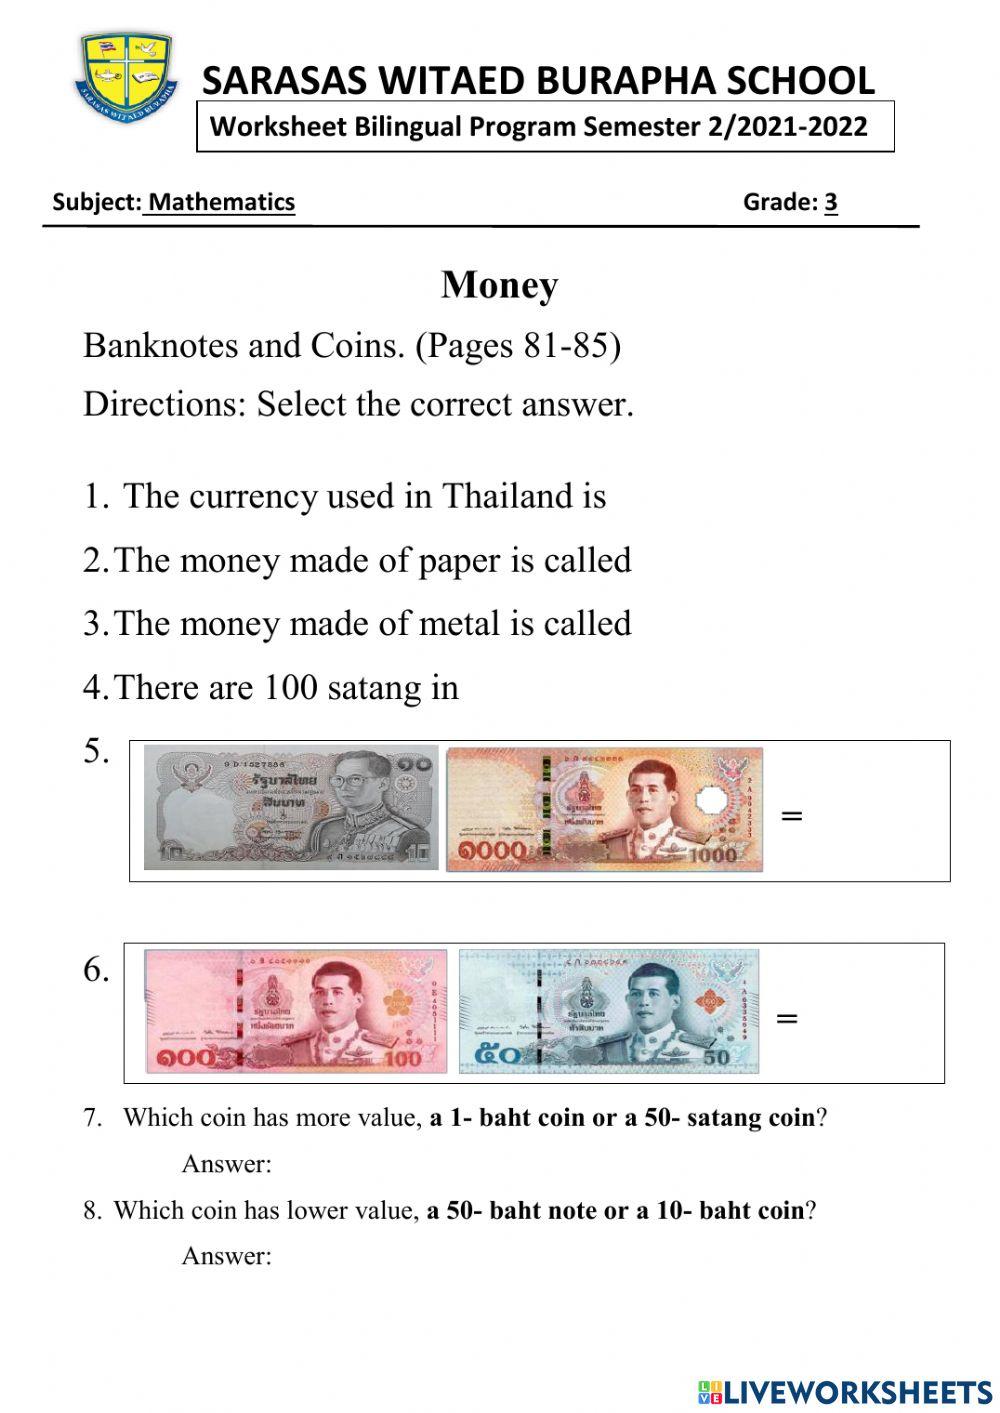 Money- Banknotes and Coins Part 1